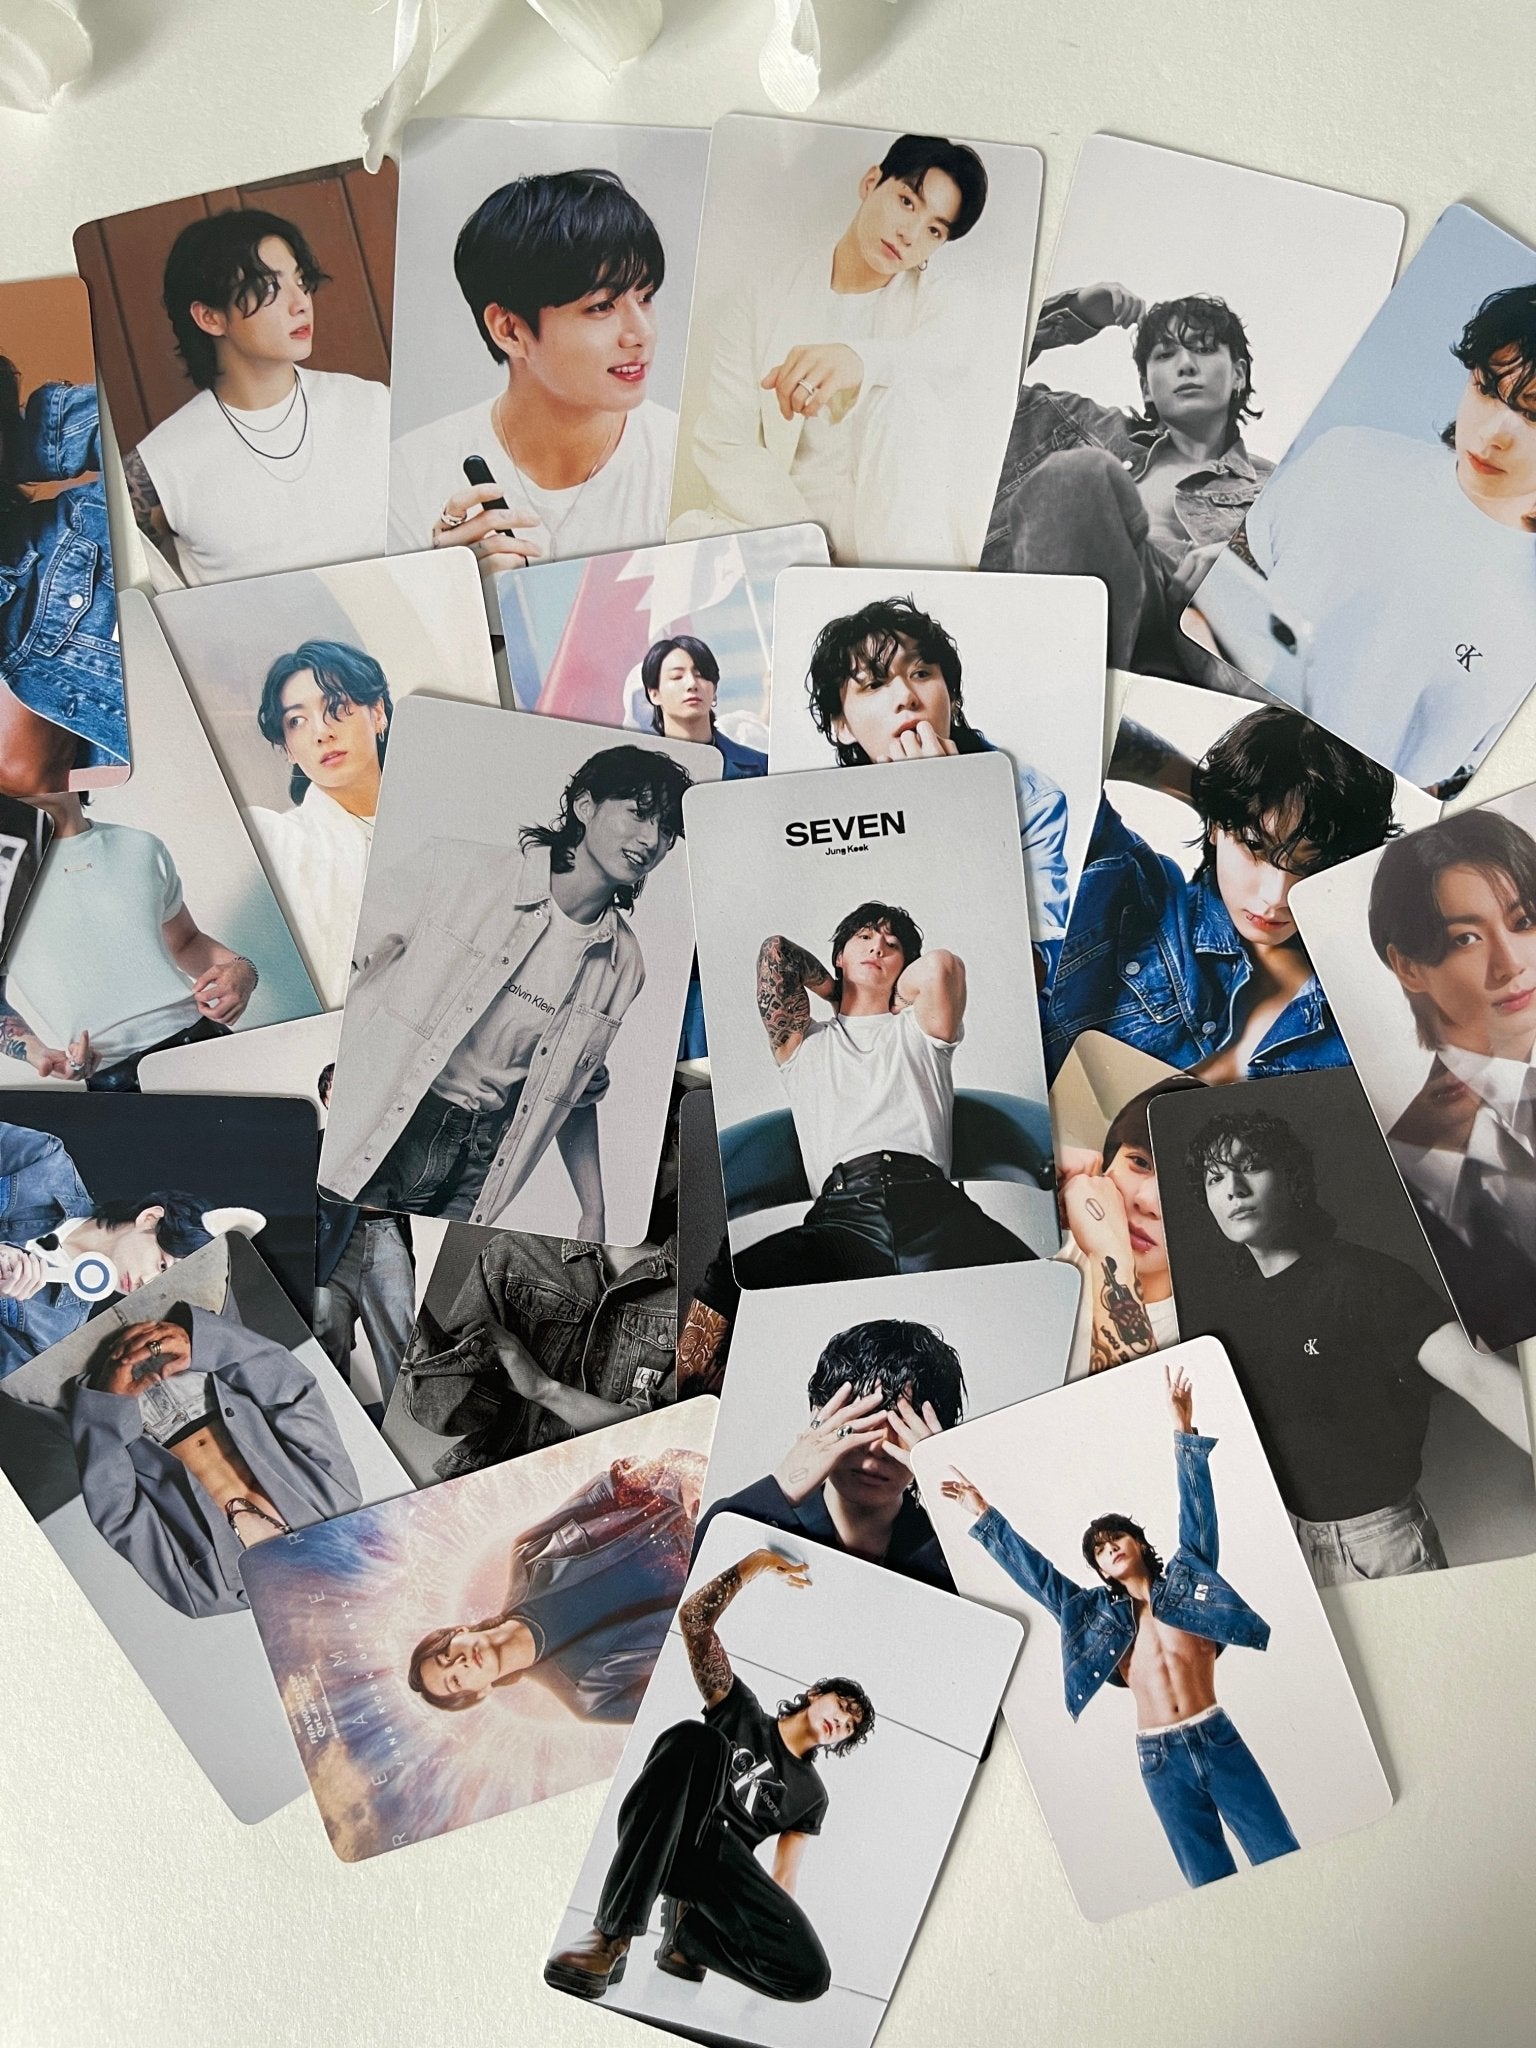 Complimentary BTS Photocards, Get complimentary BTS photocards with  purchase of selected Galaxy products at any participating Samsung  Experience Store! Learn More:, By Samsung